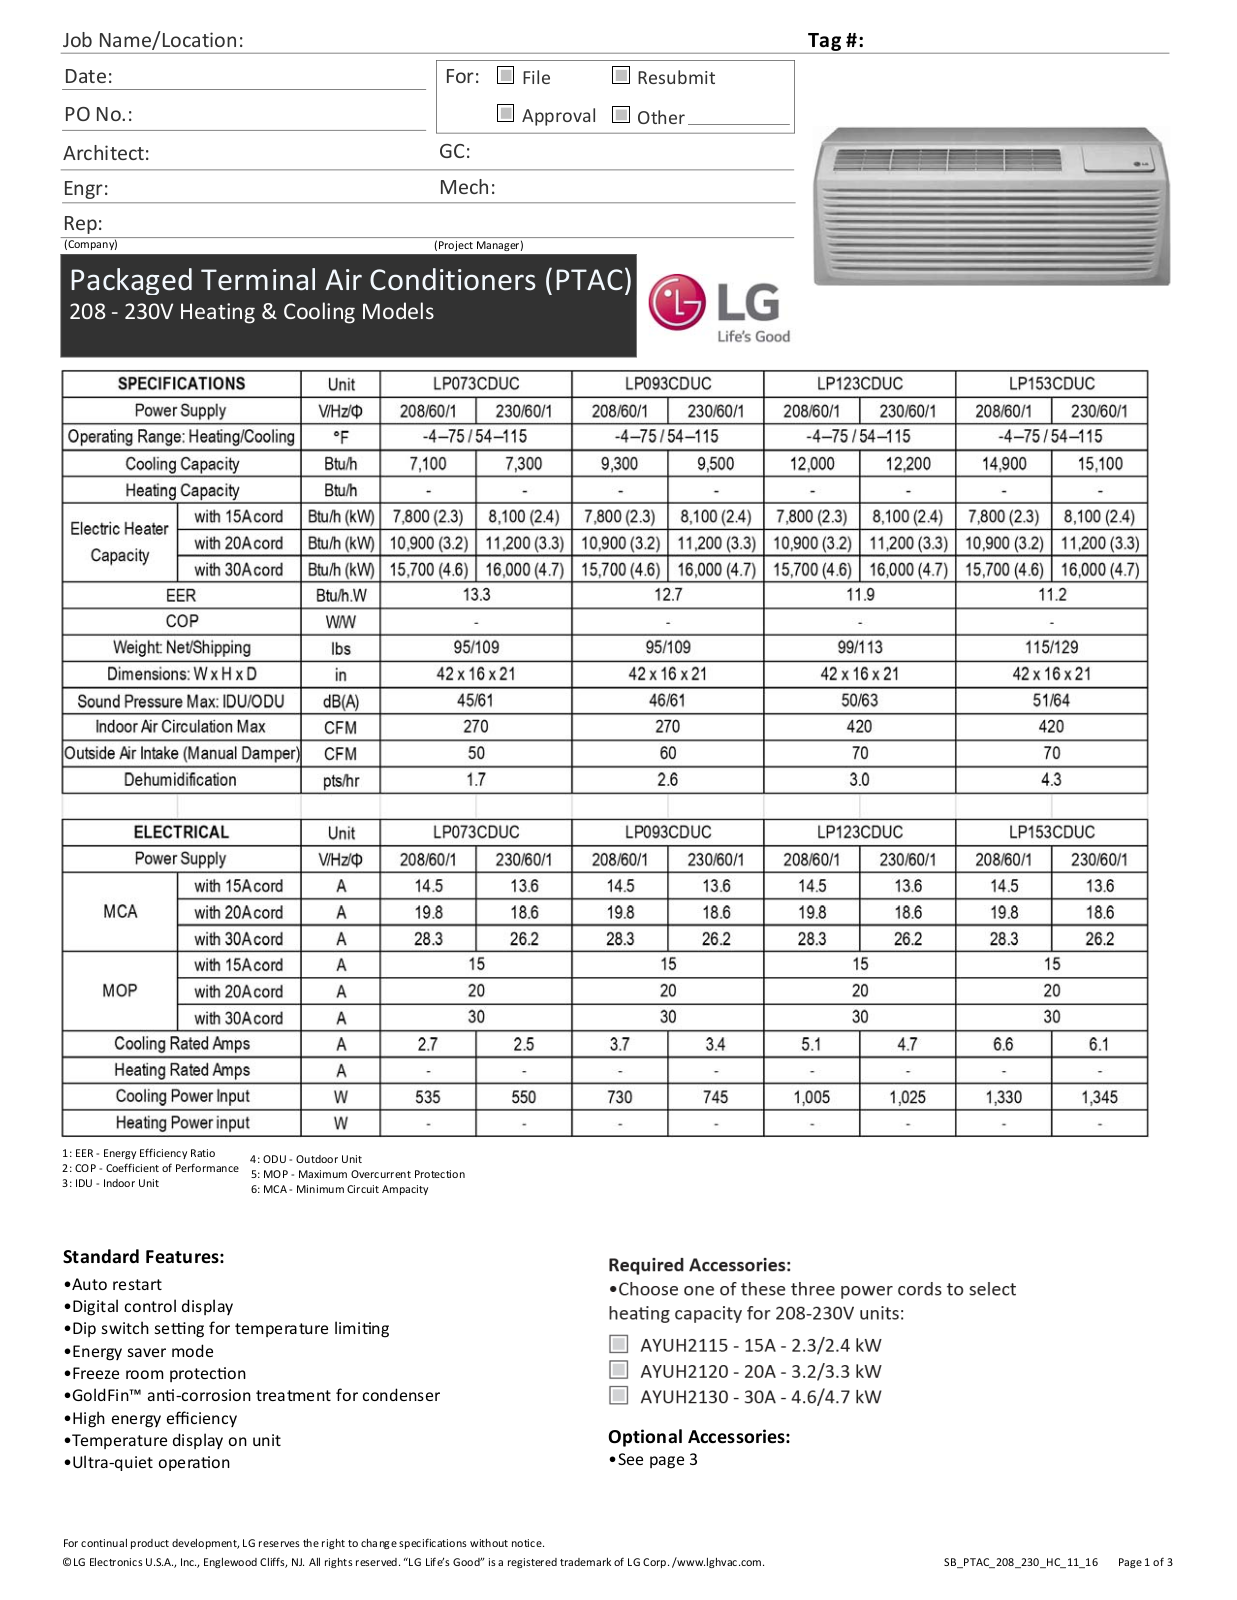 LG LP153CDUC Specifications